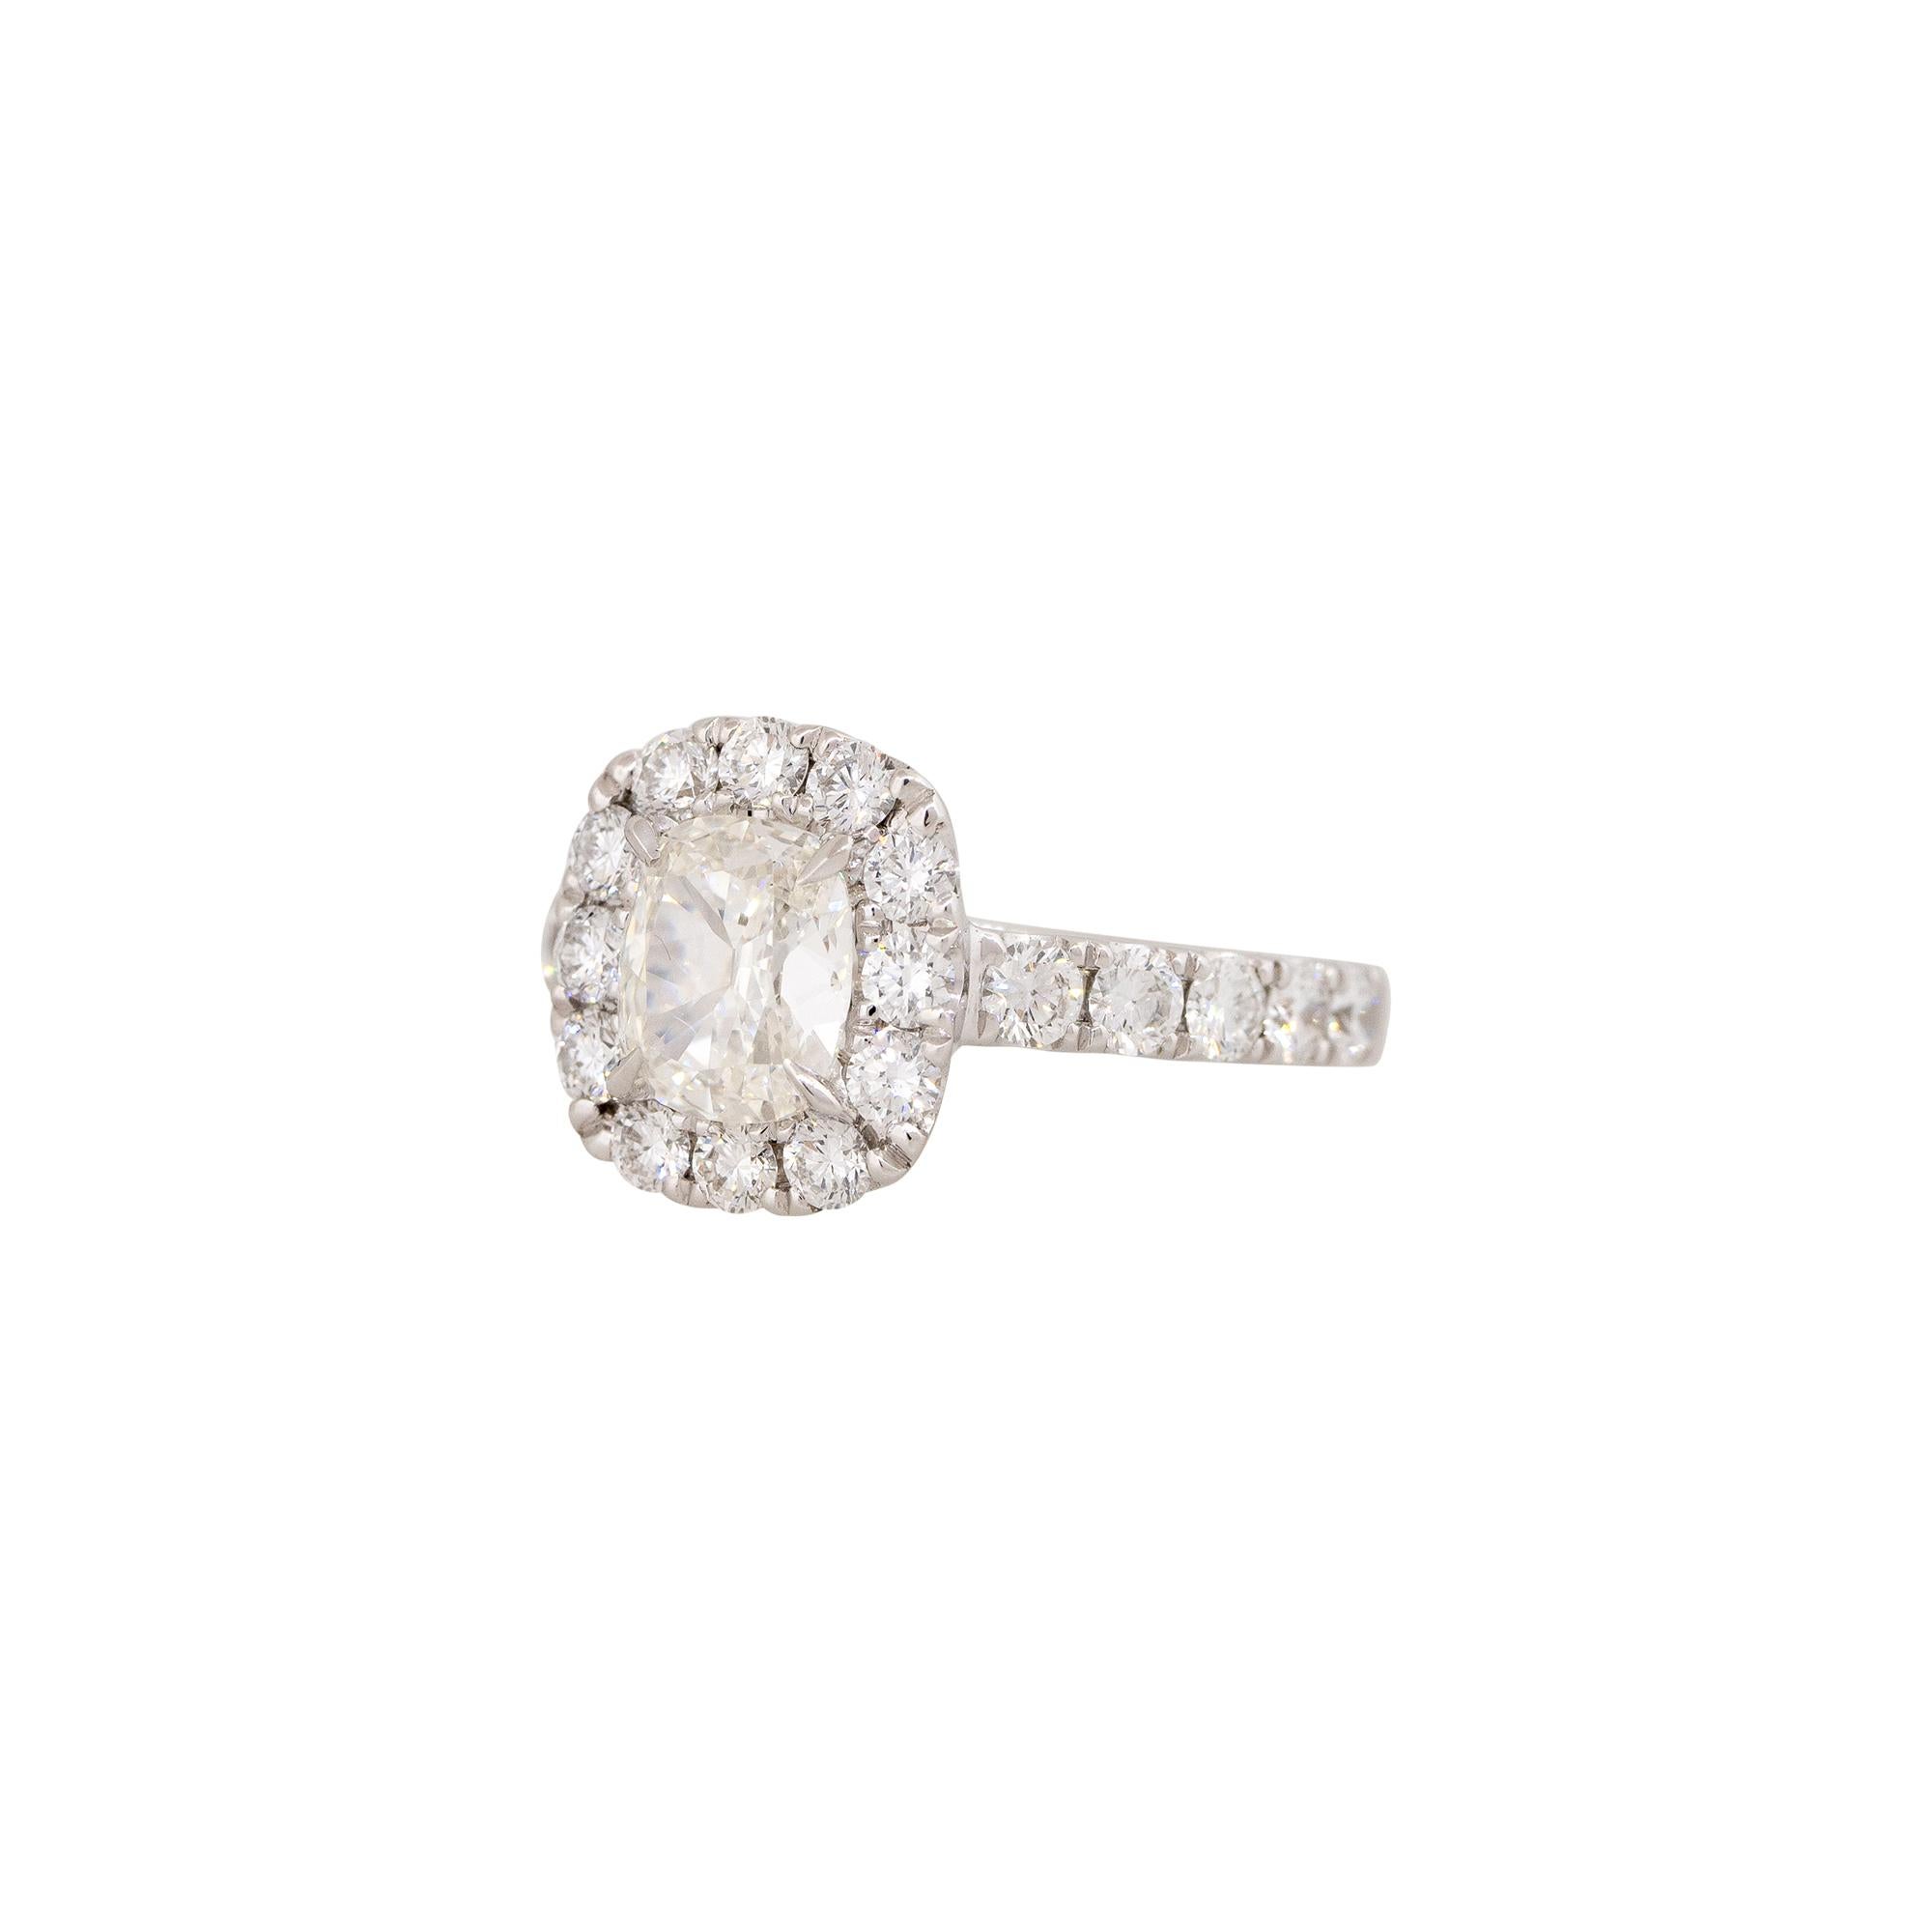 GIA 18k White Gold 2.18ctw Cushion Cut Diamond Engagement Ring

Product: Cushion cut Diamond Engagement Ring
Material: 18k White Gold
GIA Diamond Details: The main Diamond comes with a GIA Certificate, Certificate # 6194856848. The diamond is a